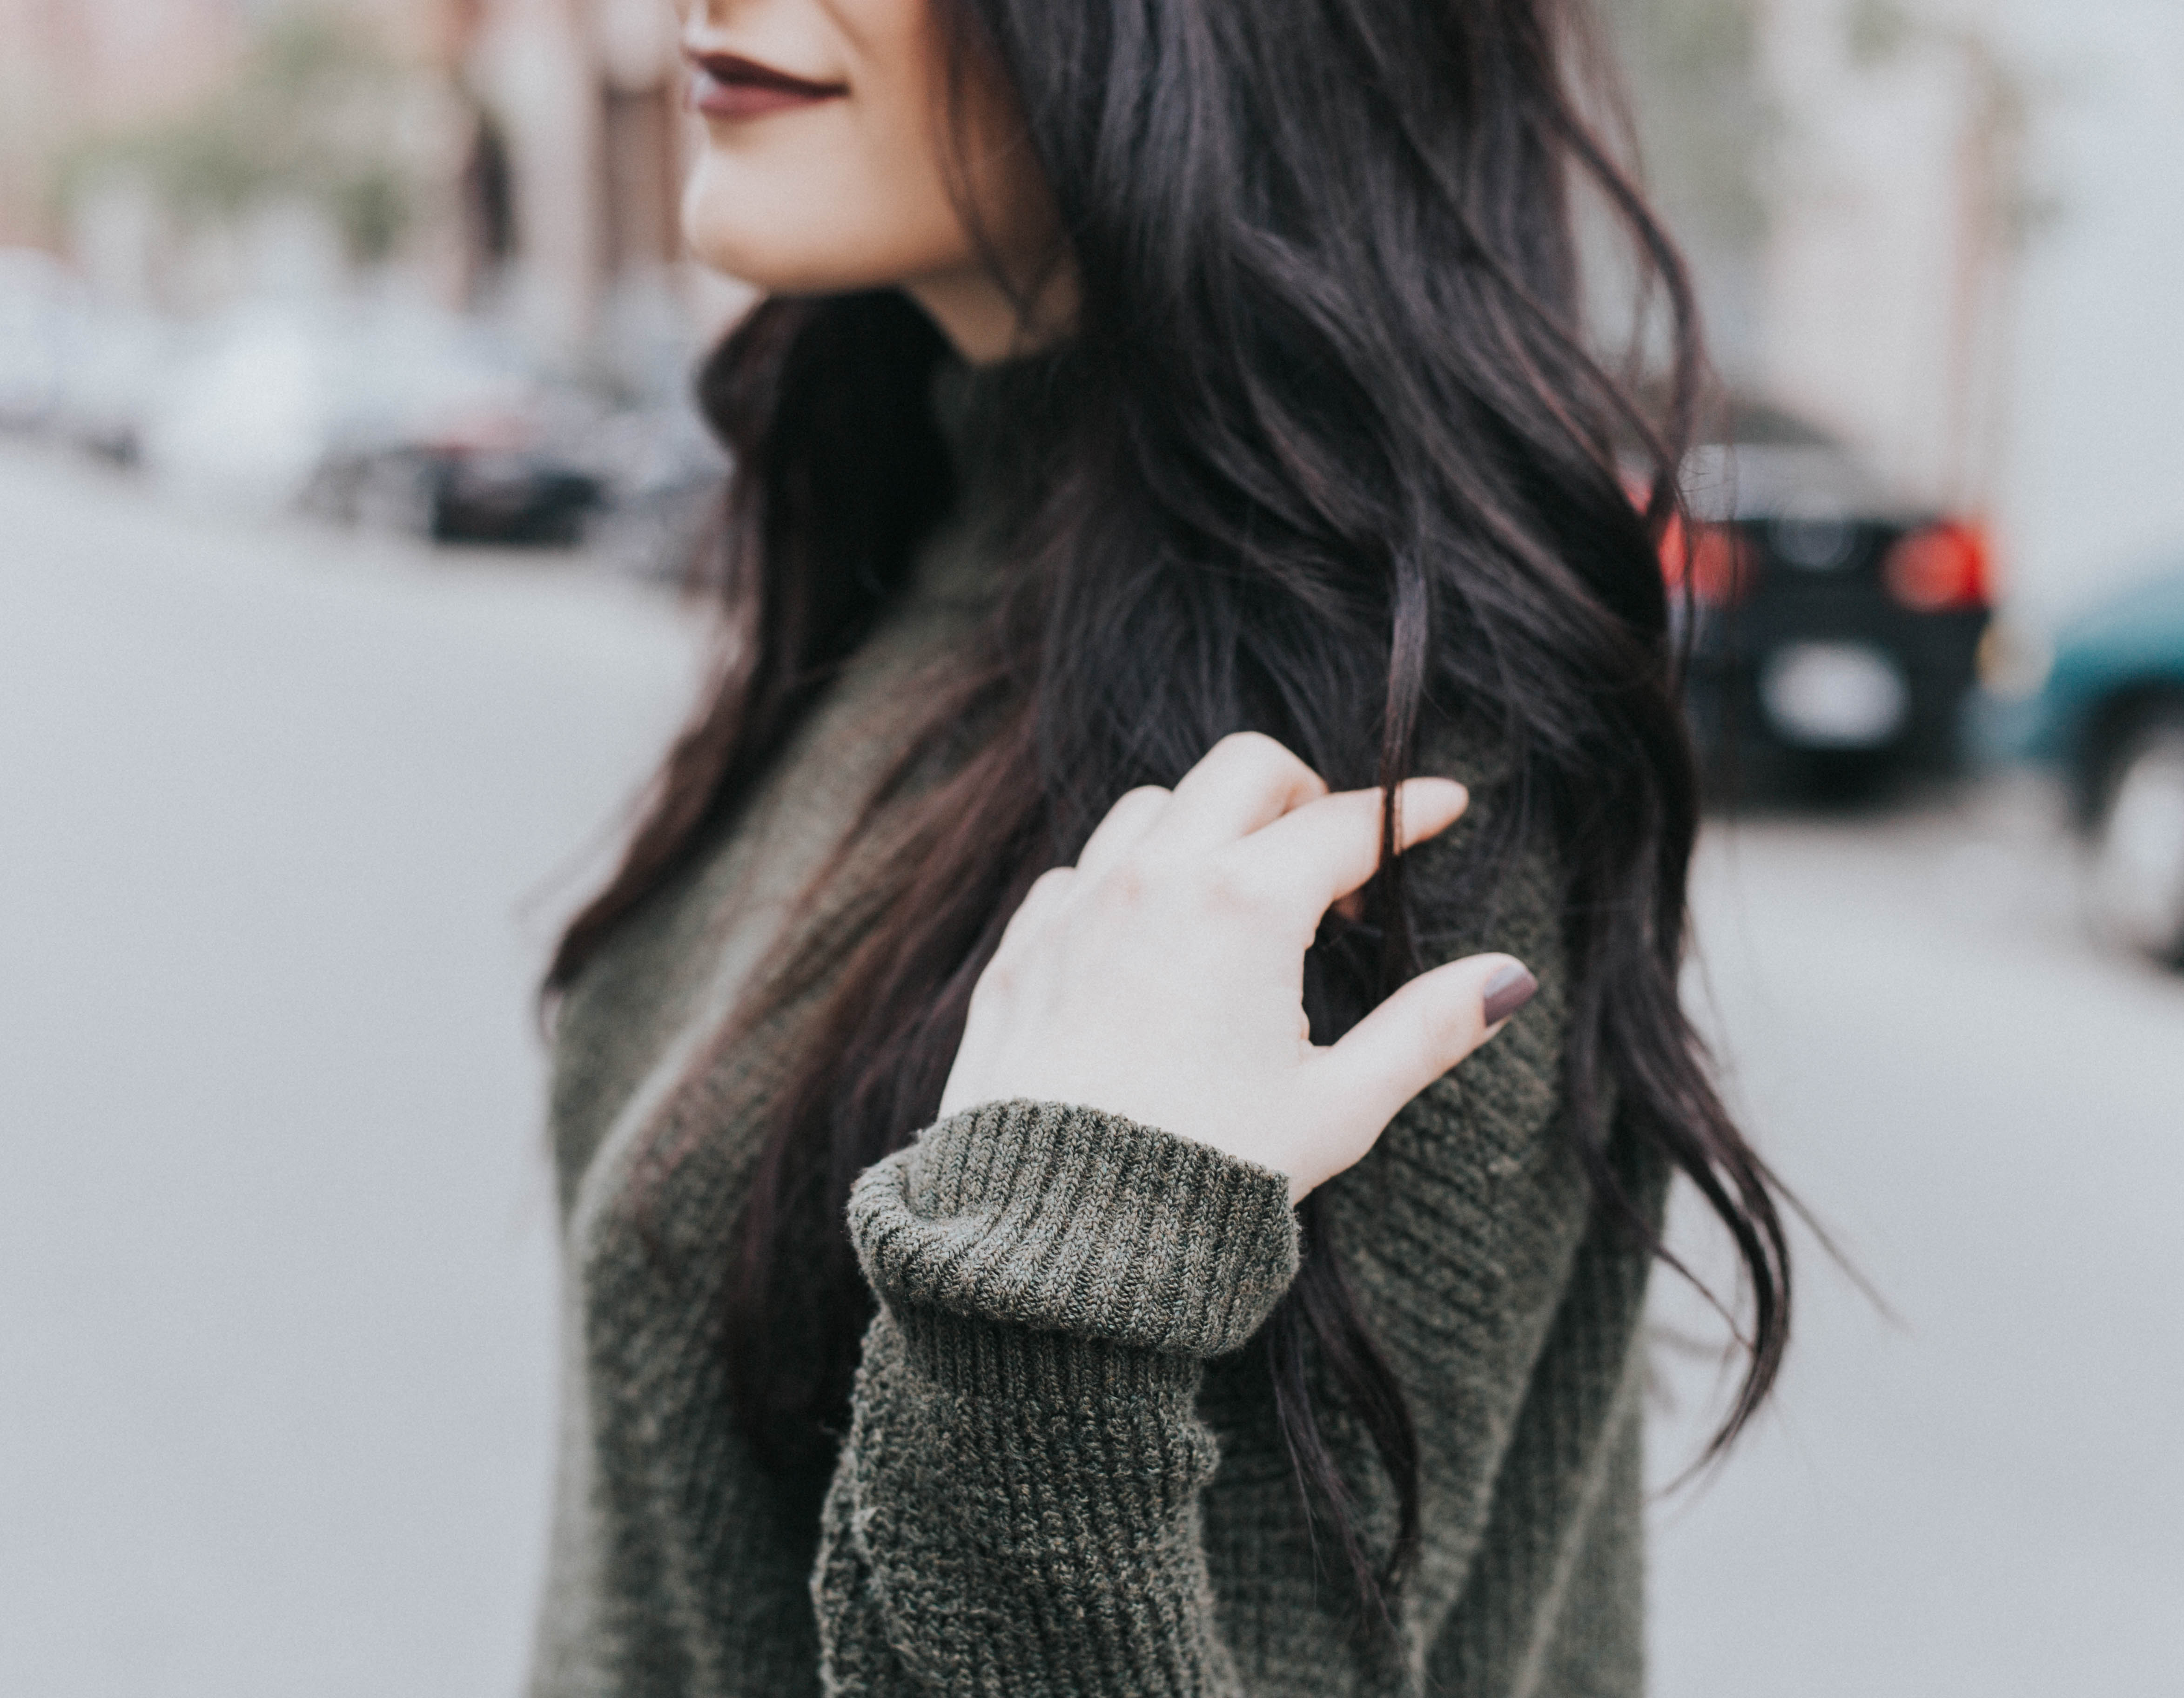 Green Sweater On Repeat | Twinspiration